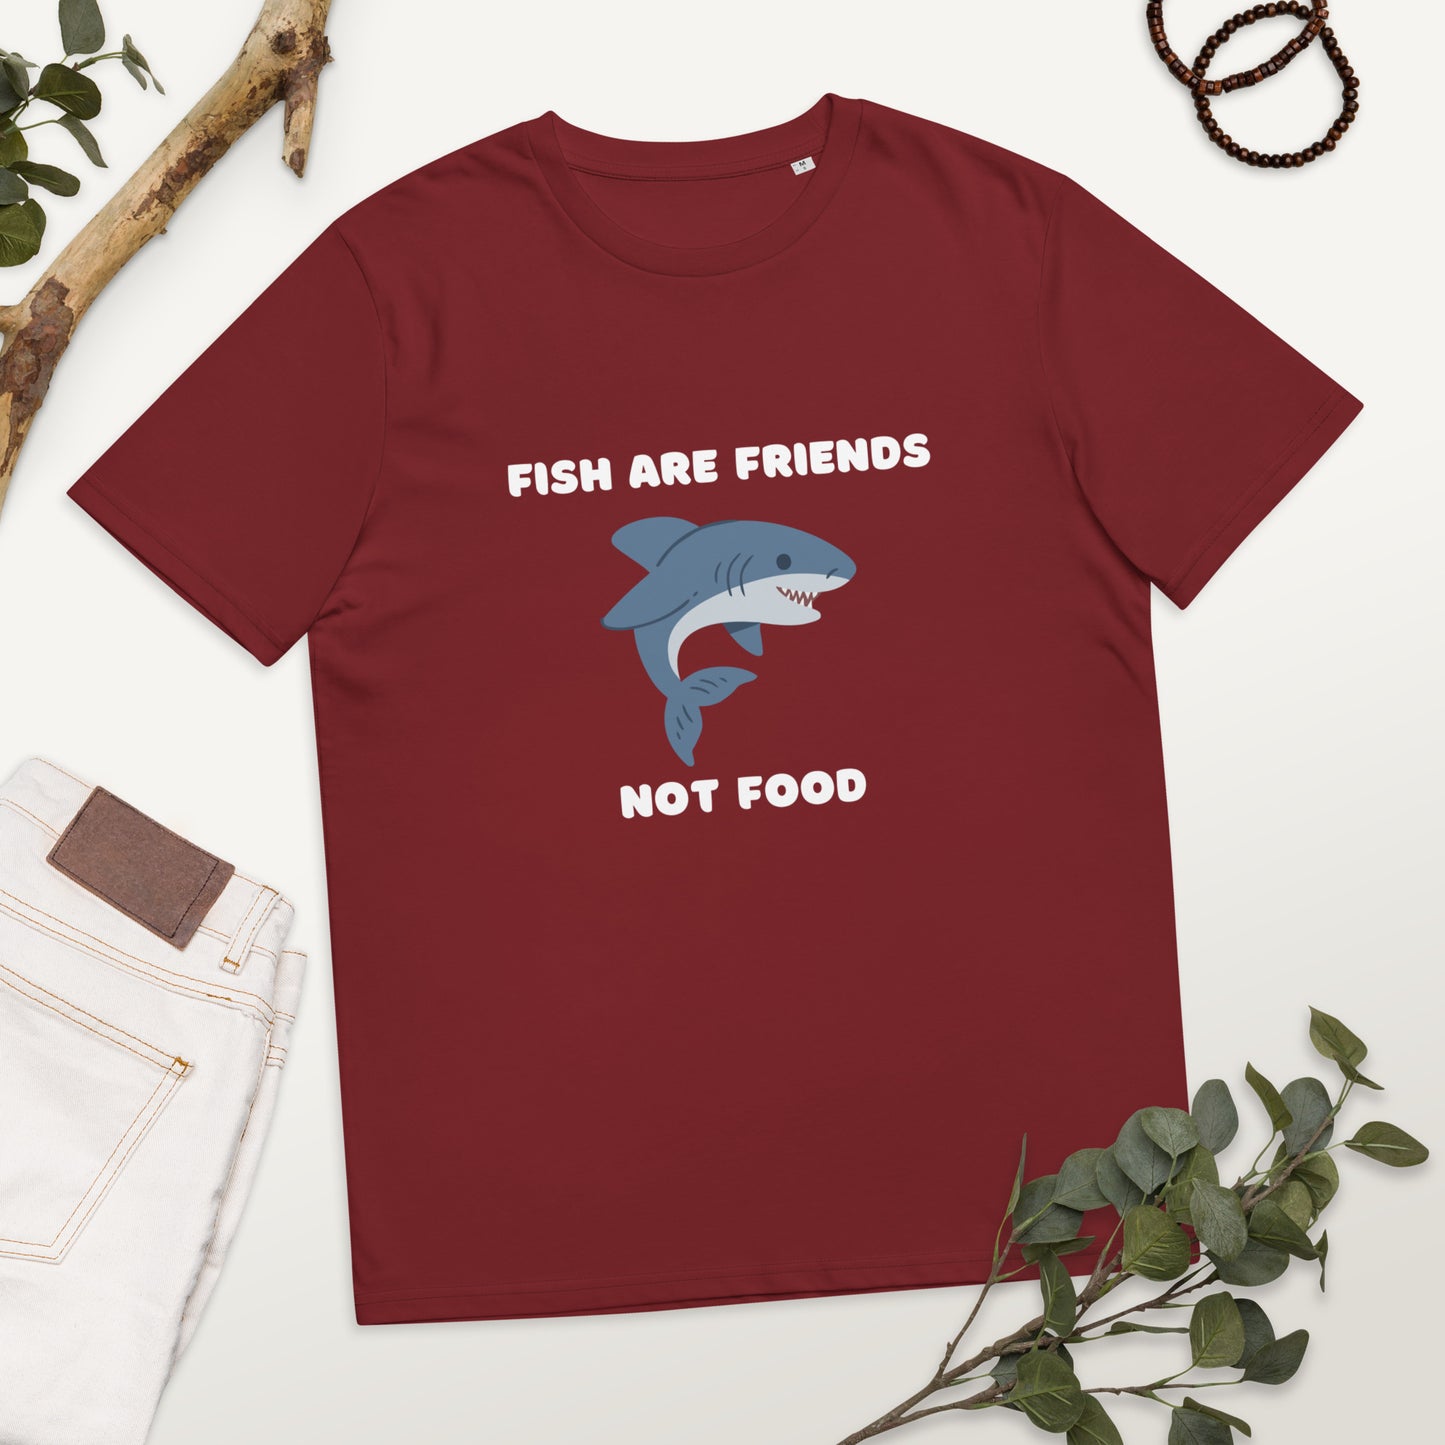 Fish are Friends Not Food - Unisex organic cotton t-shirt